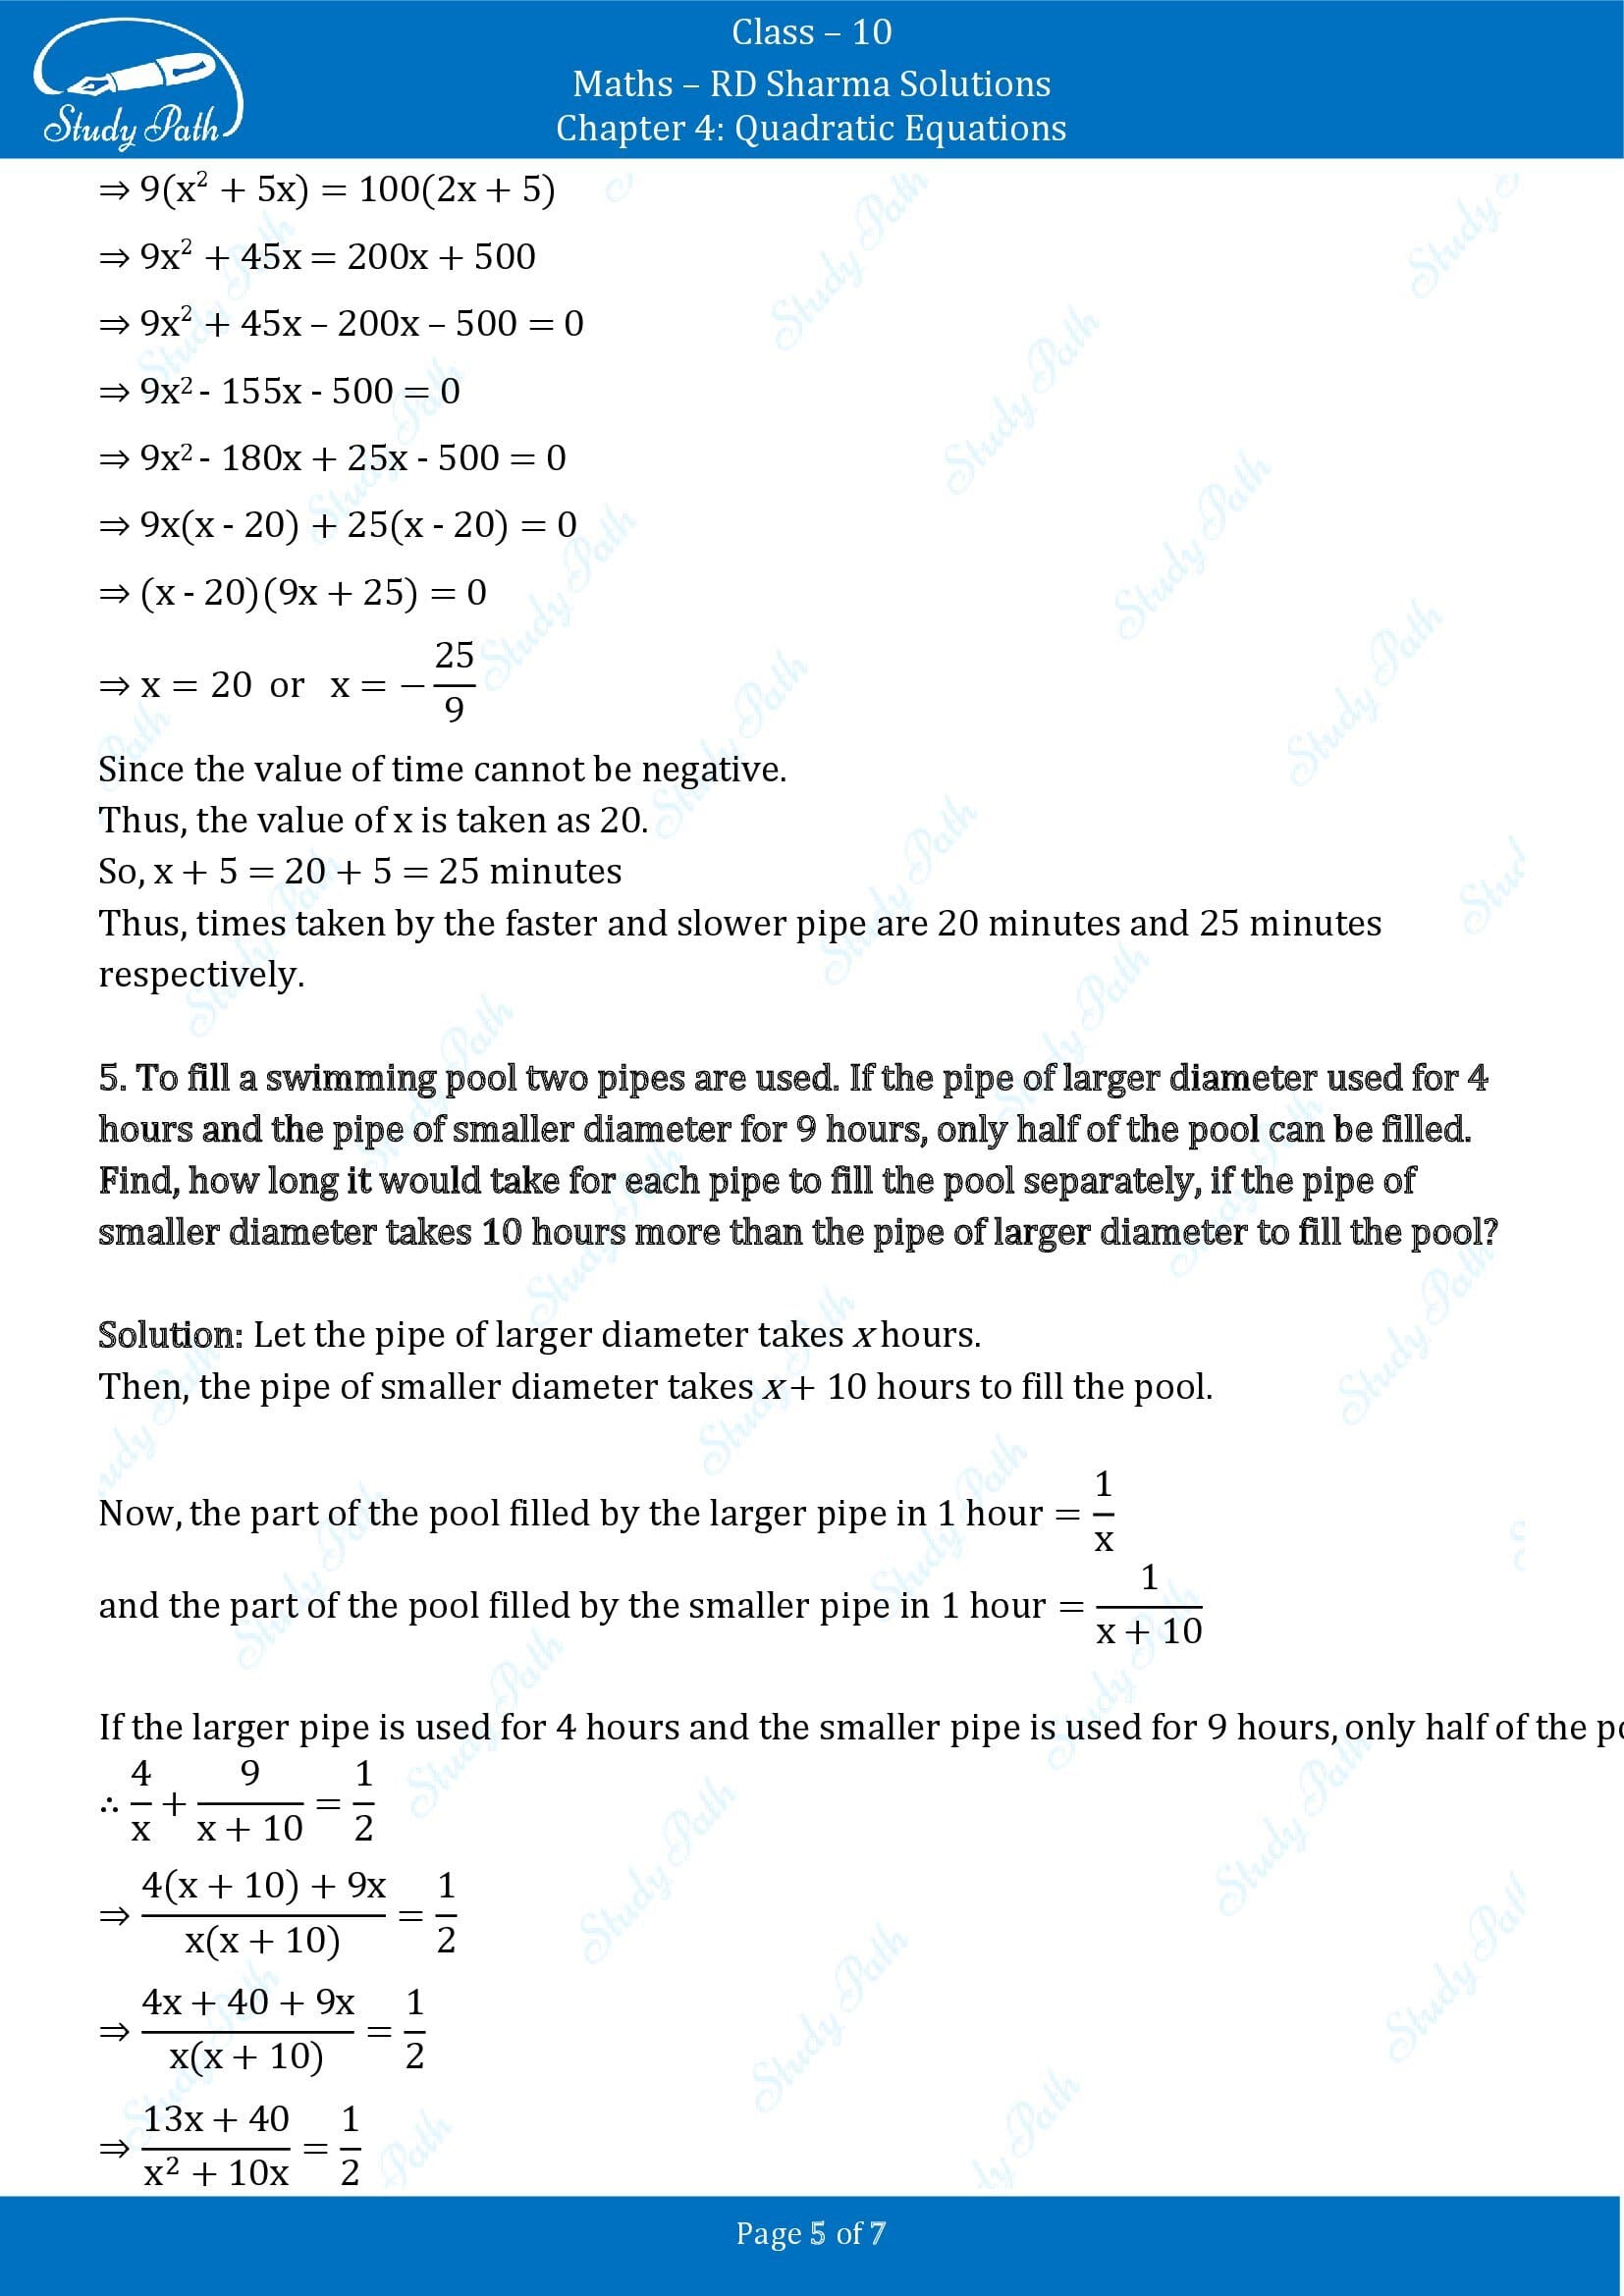 RD Sharma Solutions Class 10 Chapter 4 Quadratic Equations Exercise 4.12 00005